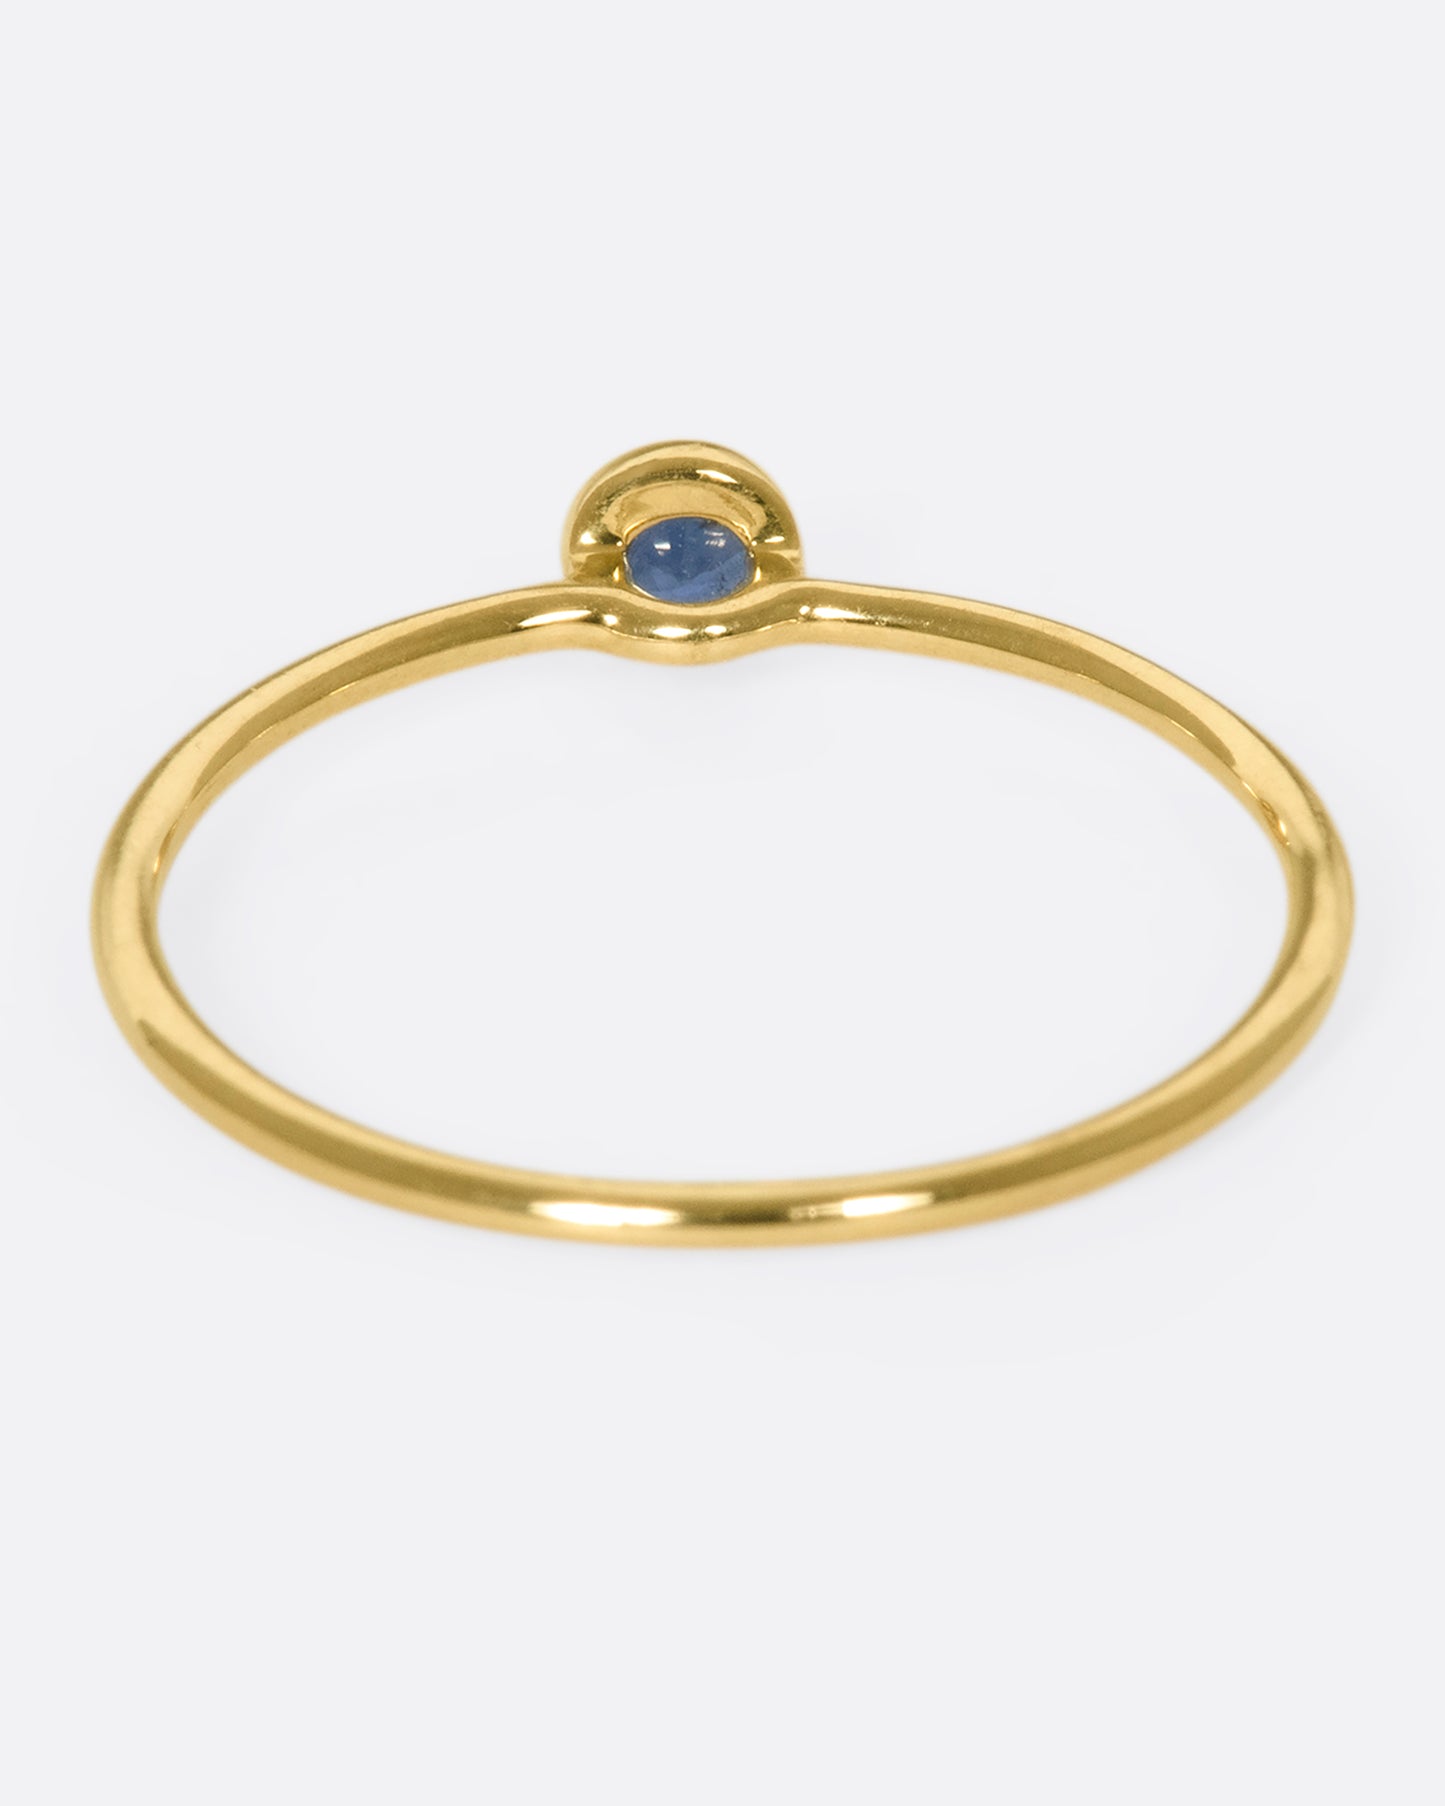 Round blue sapphire set on a 9k gold ring